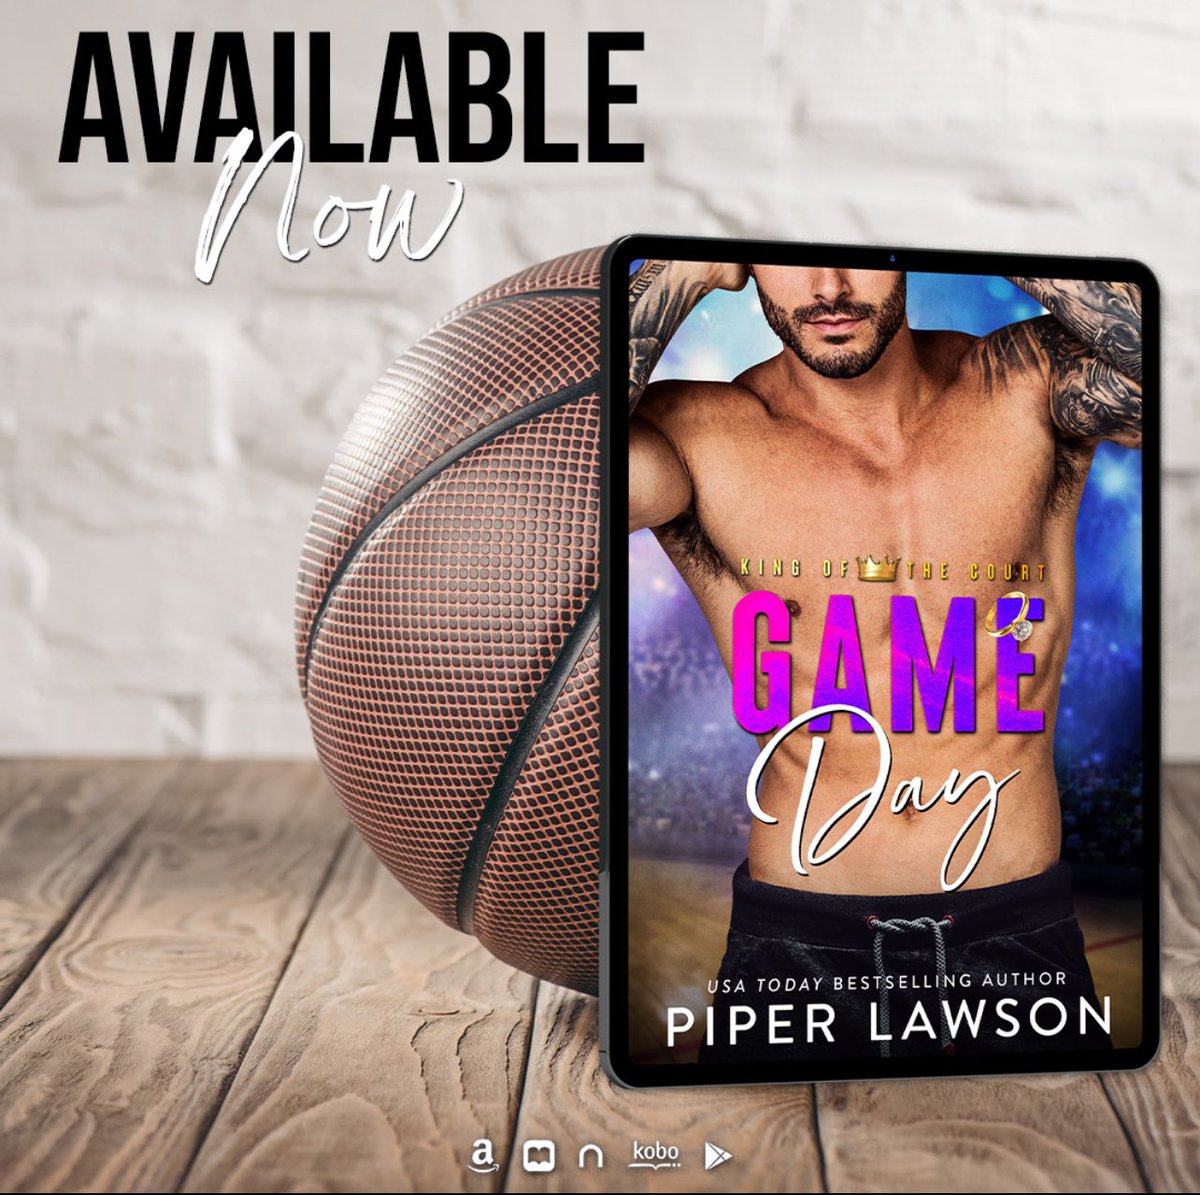 Game Day by Piper Lawson is now LIVE!

Download today on Amazon, Apple Books, Barnes & Noble, Google Play, and Kobo! 

Amazon: bit.ly/3va1GPO

Start the King of the Court series here!
bit.ly/3ToV2gX

#PiperLawson #bookish #valentineprlm @valentine_pr_